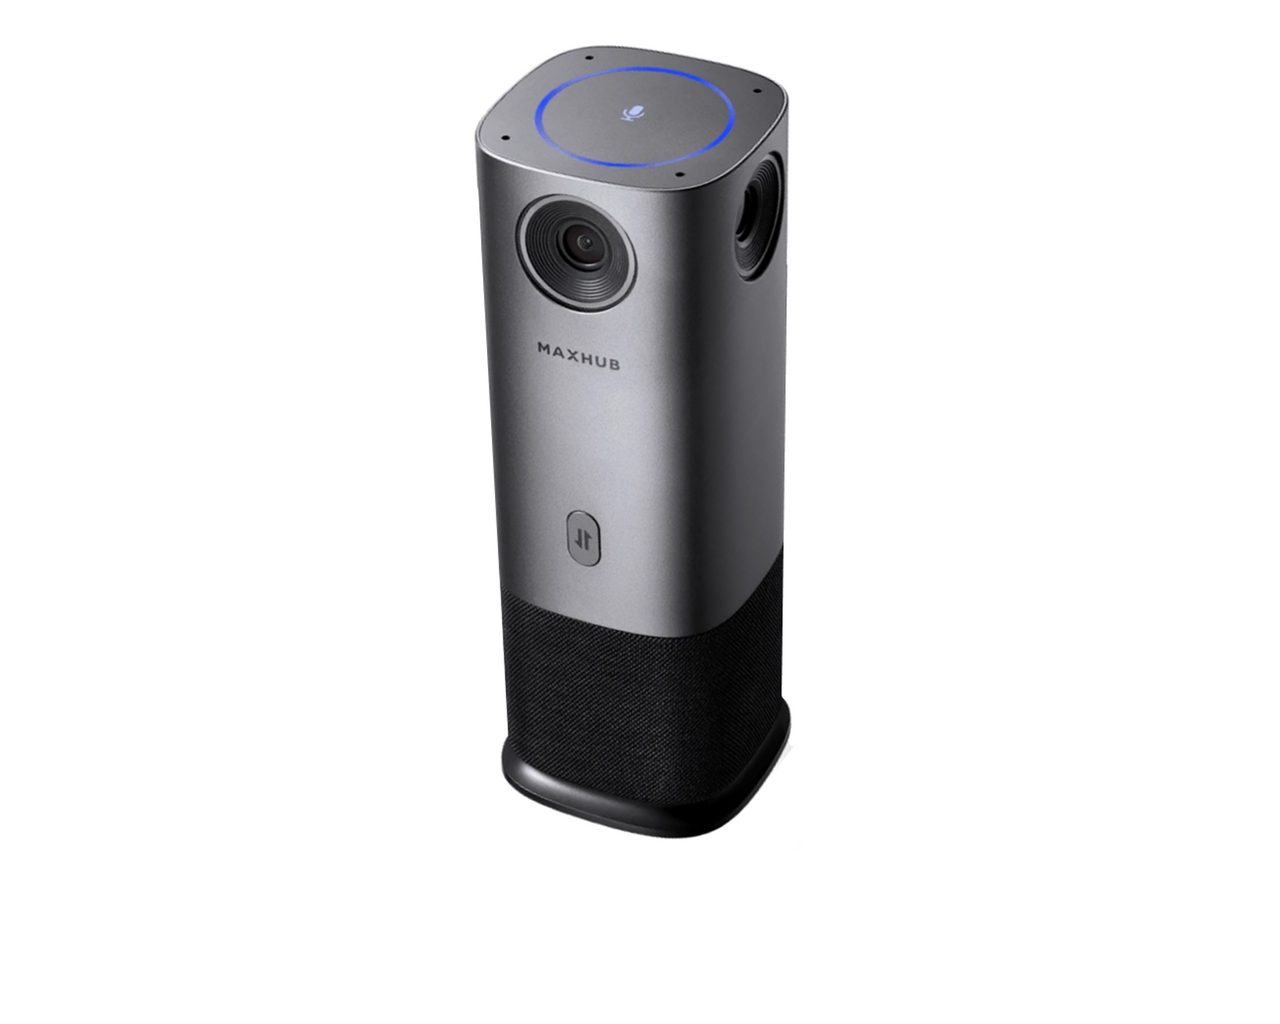 MAXHUB UCM40 4K Camera with 4 integrated lenses providing 360 degree, panorama Field of View